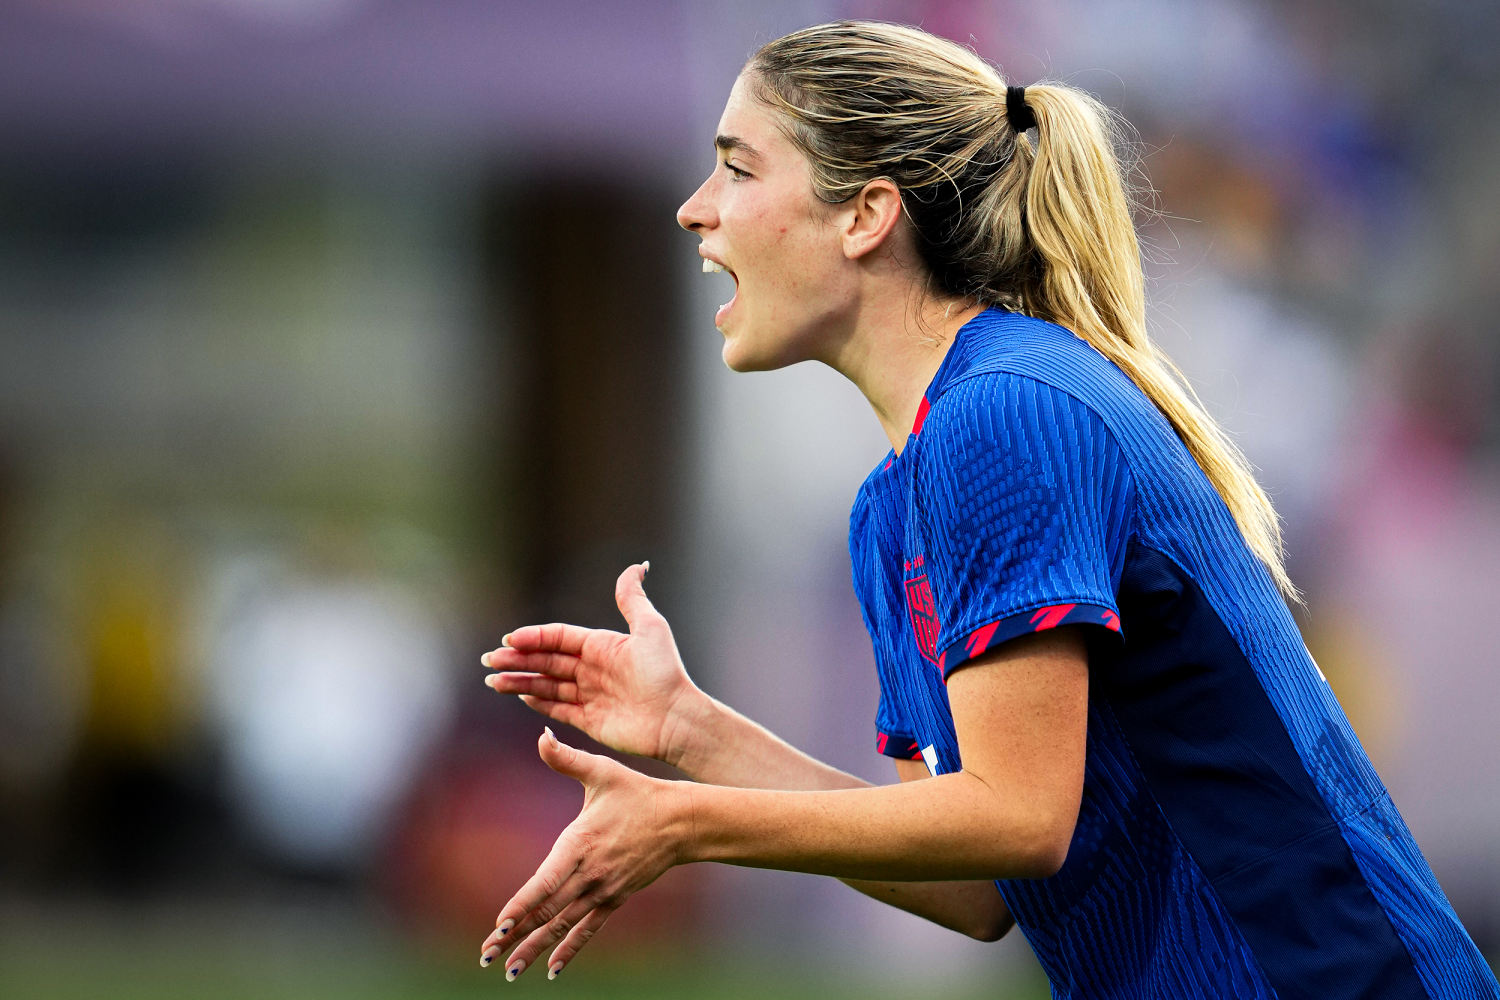 U.S. women’s soccer association says it supports LGBTQ rights after player's social media posts